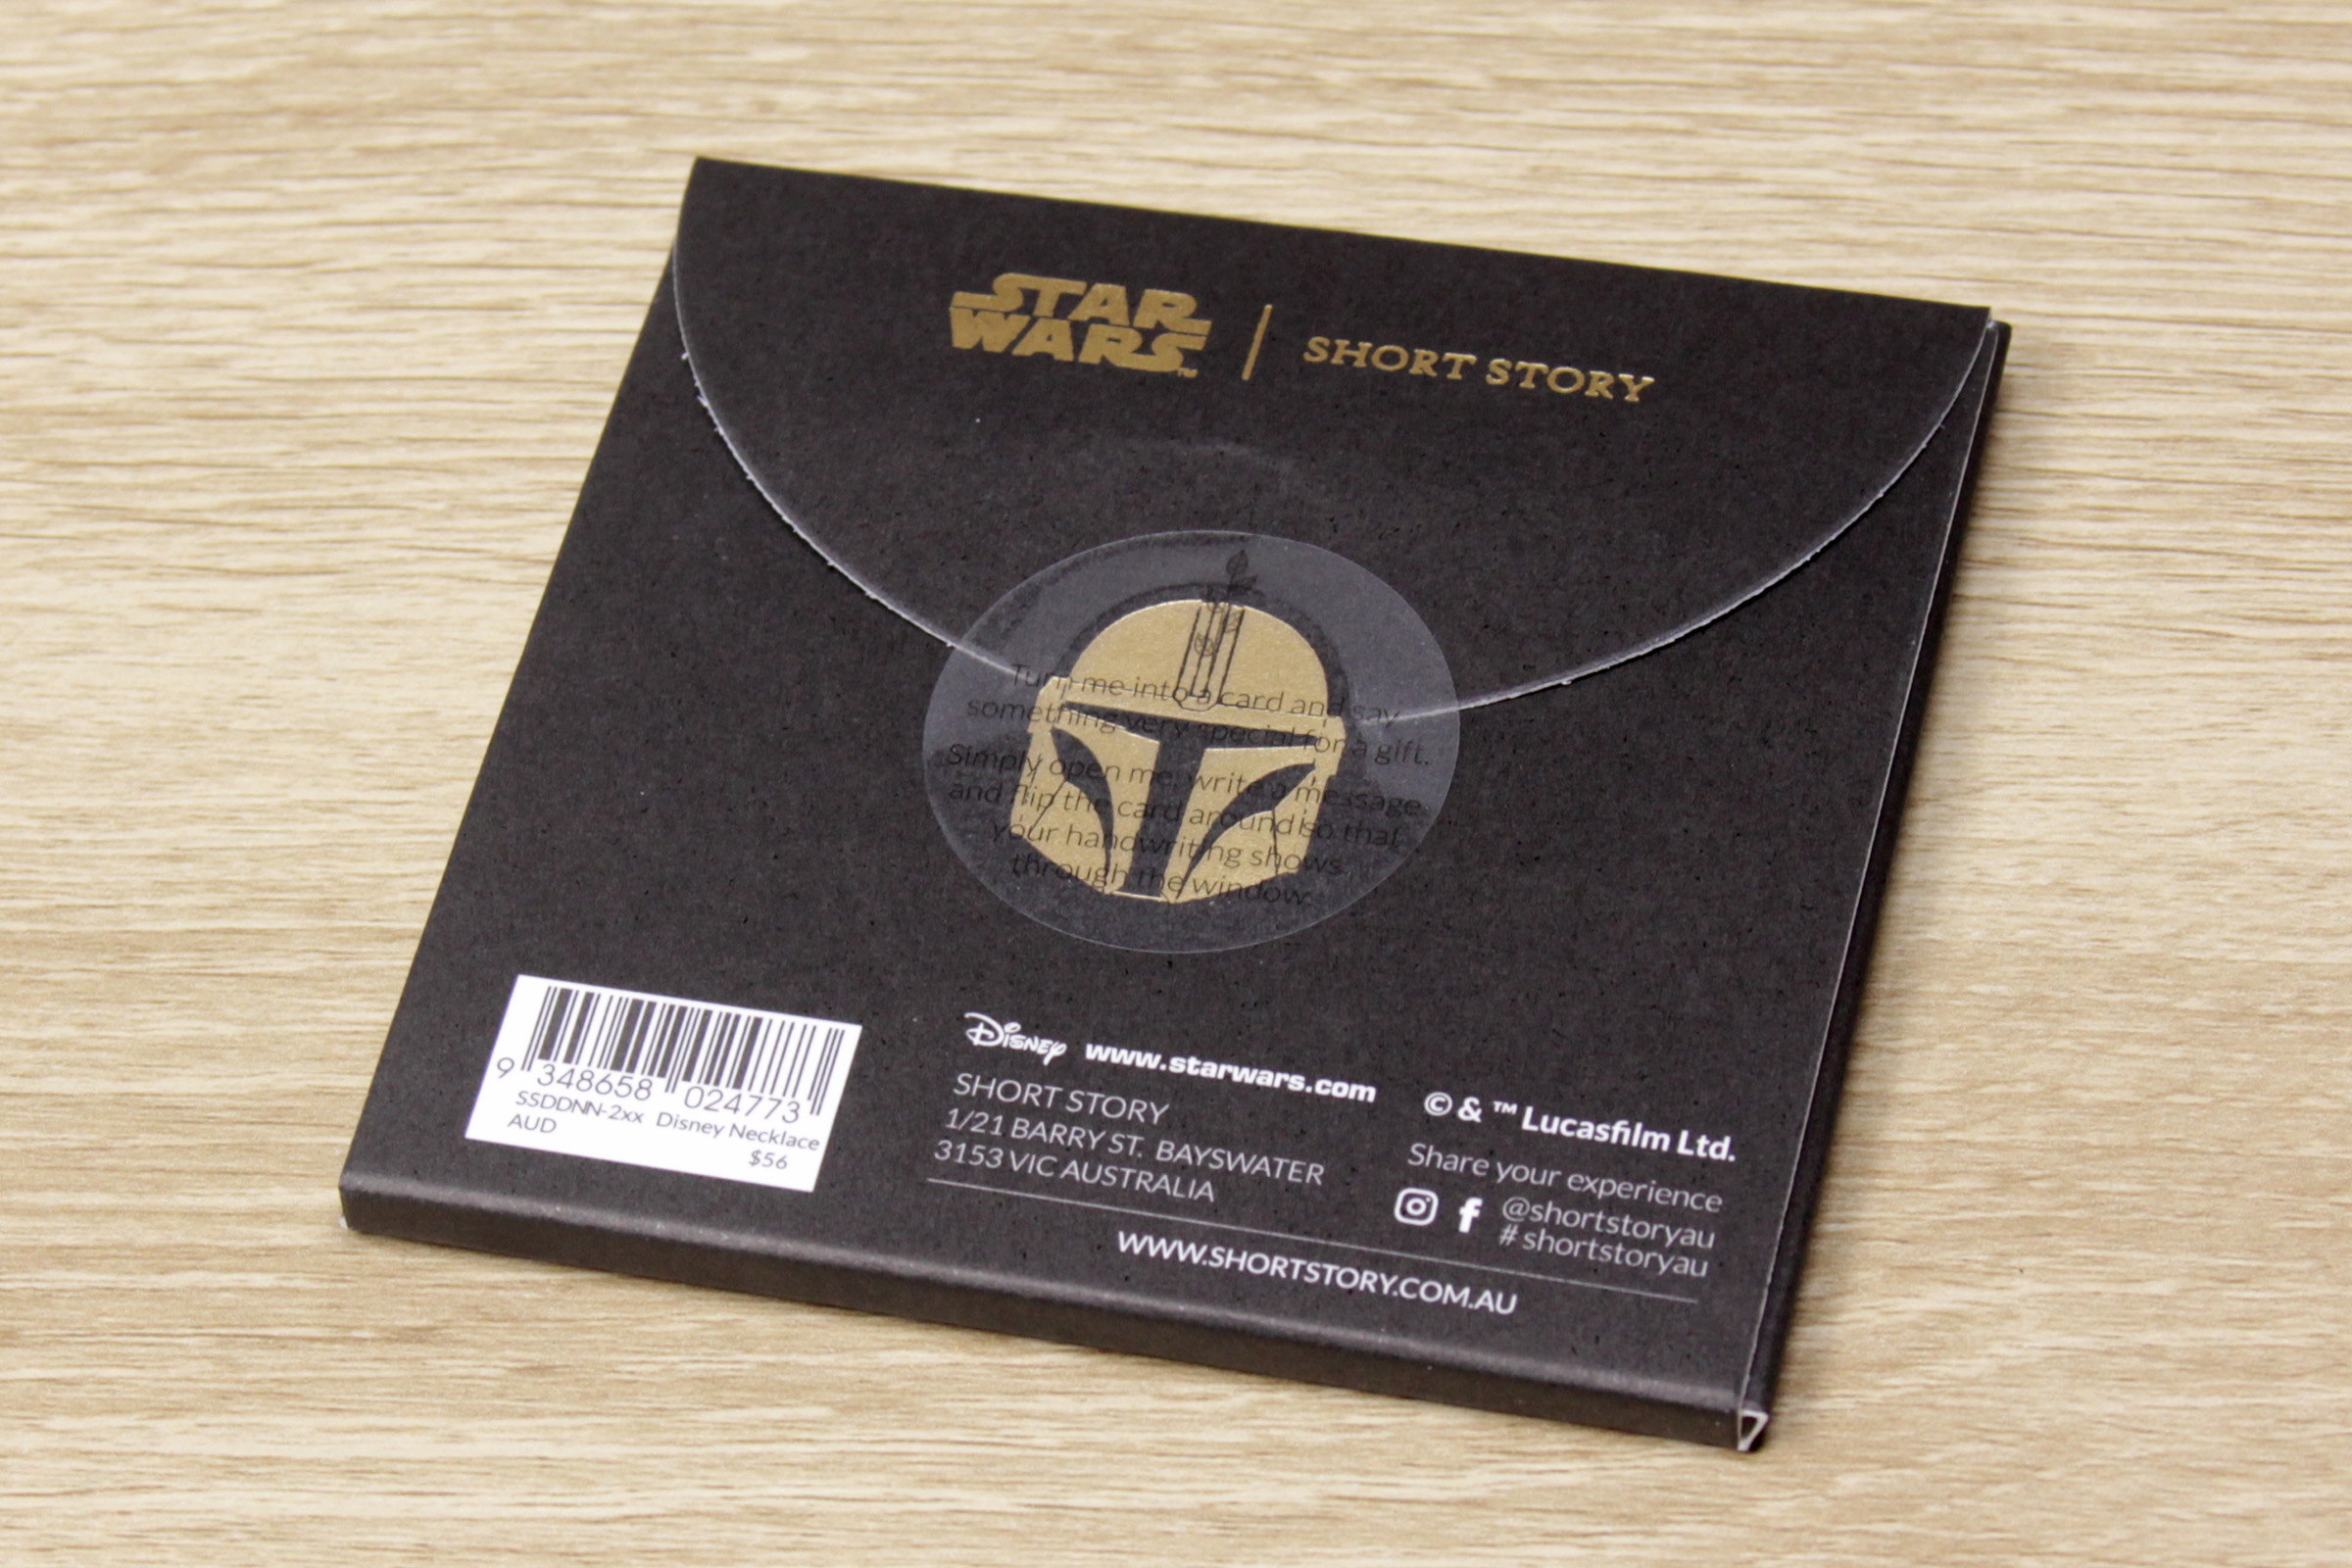 Short Story x Star Wars - Packaged Necklace